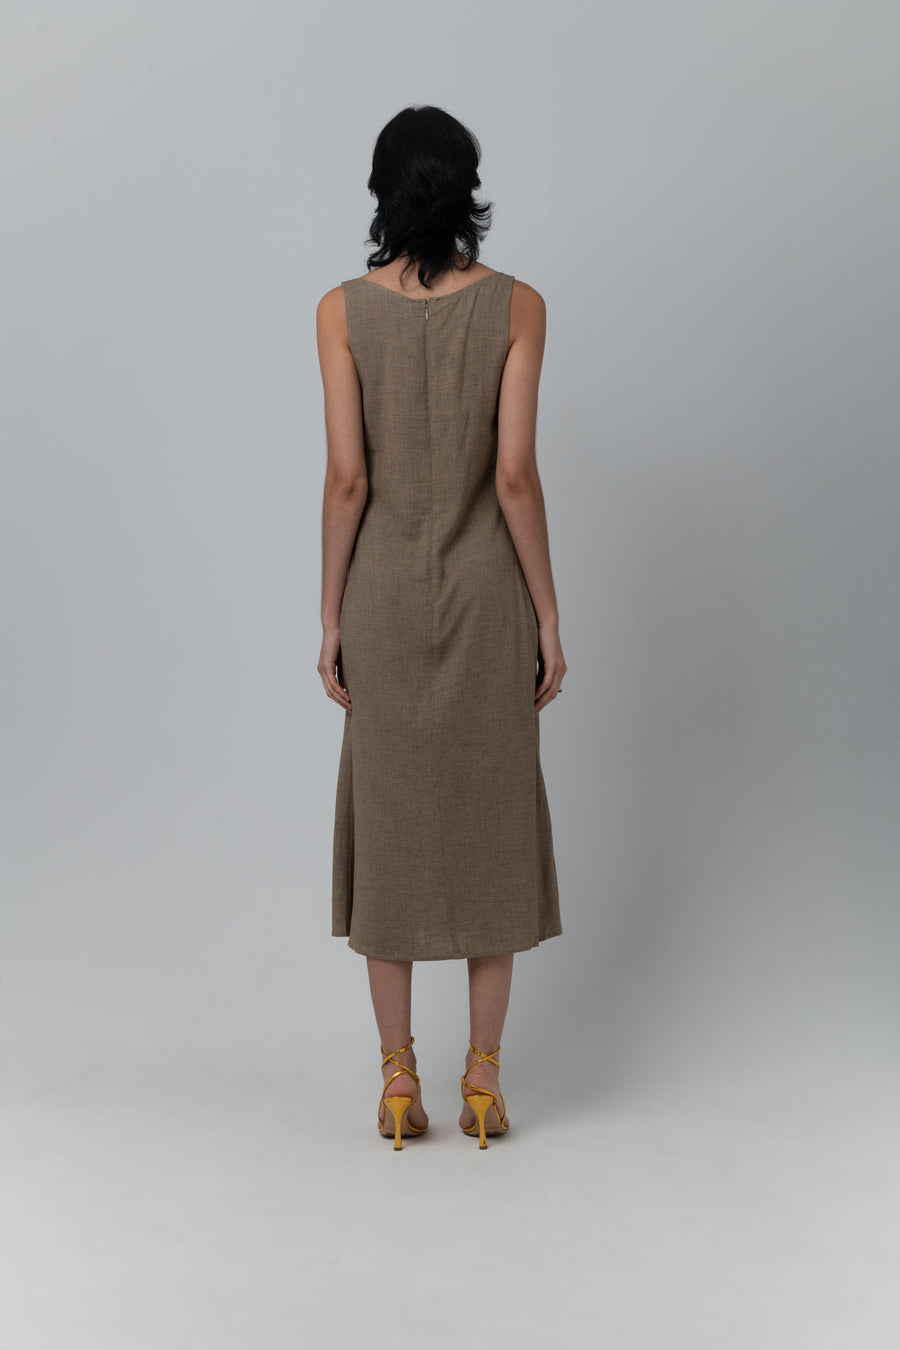 THE CITY DRESS - TAUPE